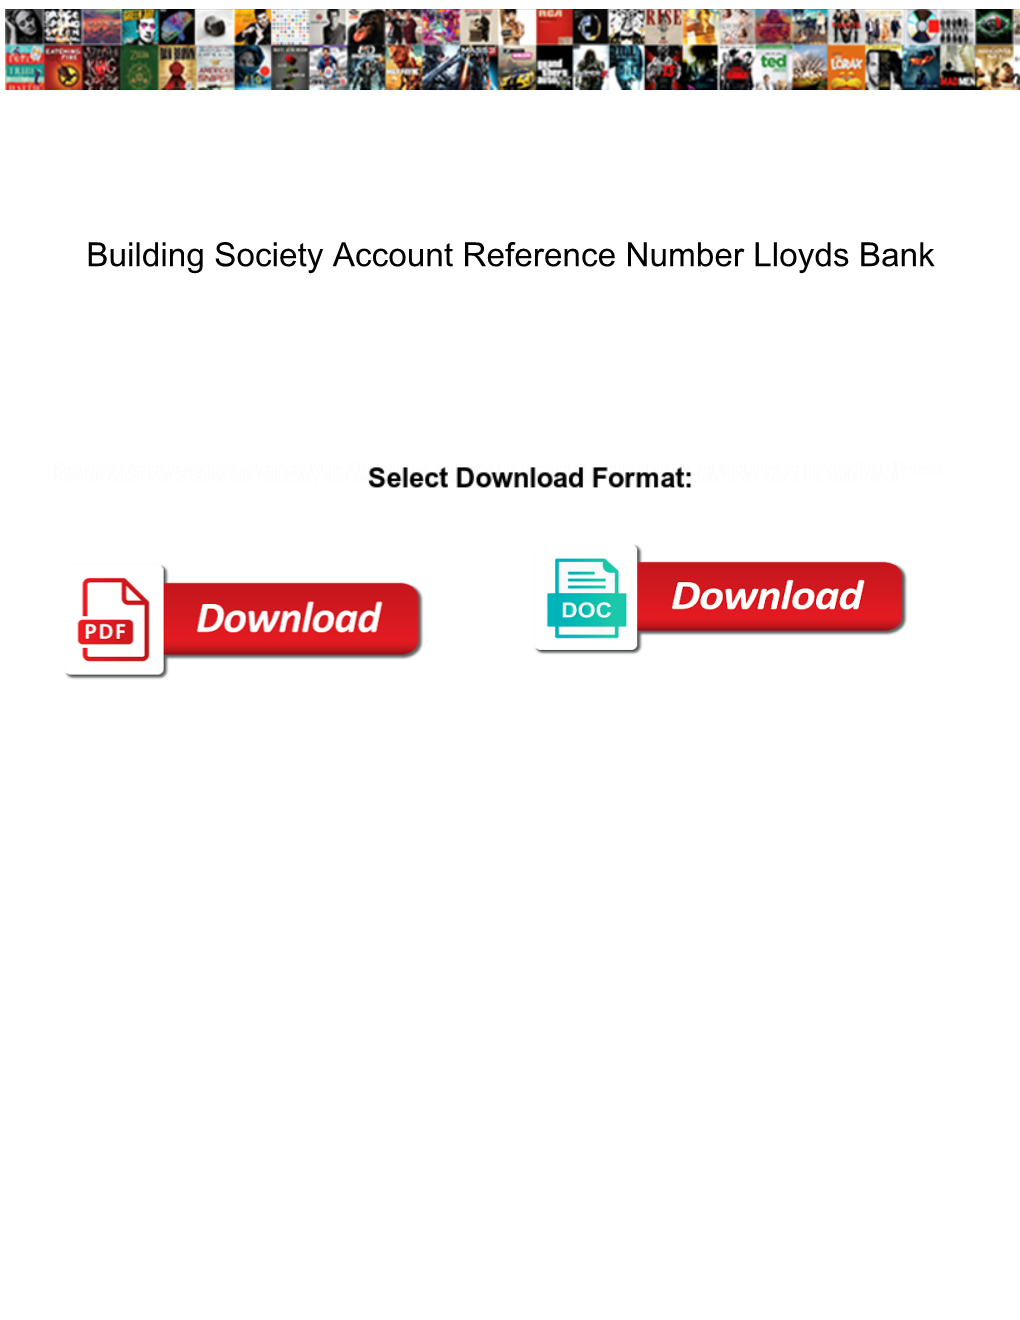 Building Society Account Reference Number Lloyds Bank